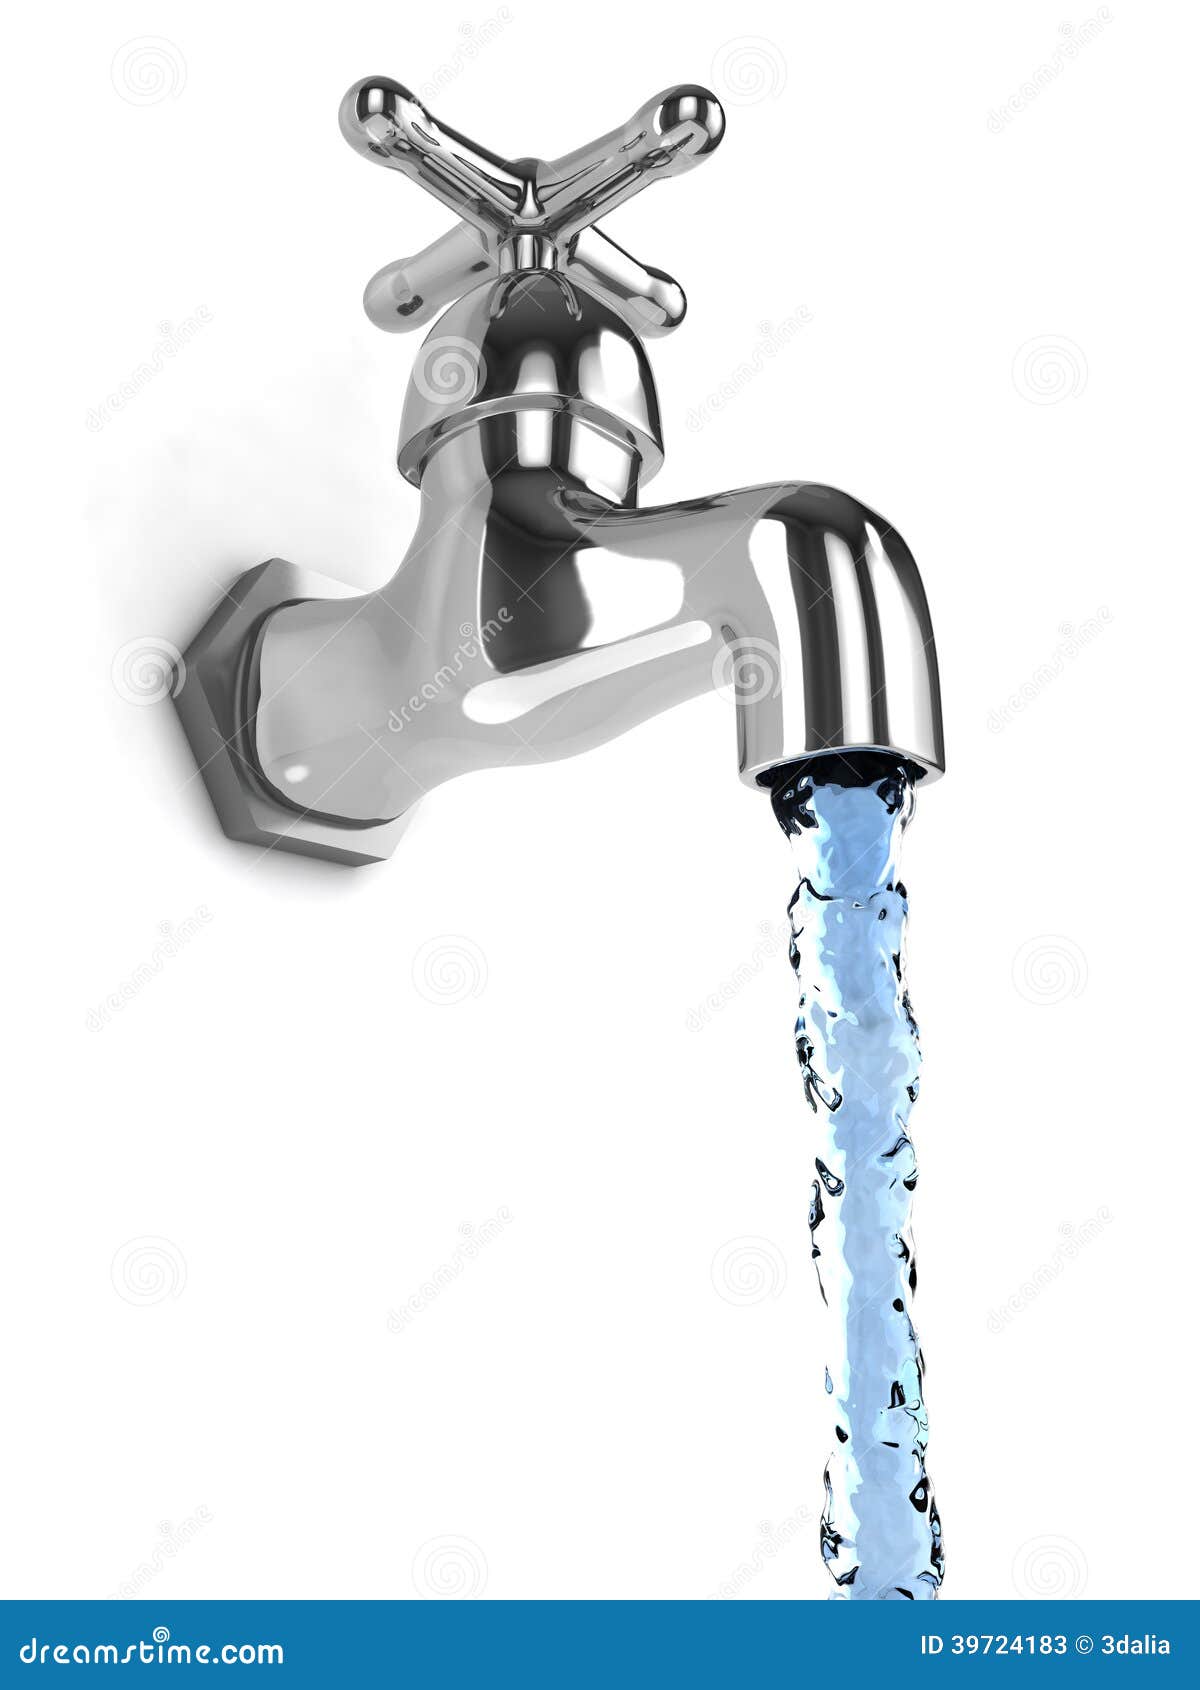 3d Water from tap stock illustration. Illustration of chrome - 39724183